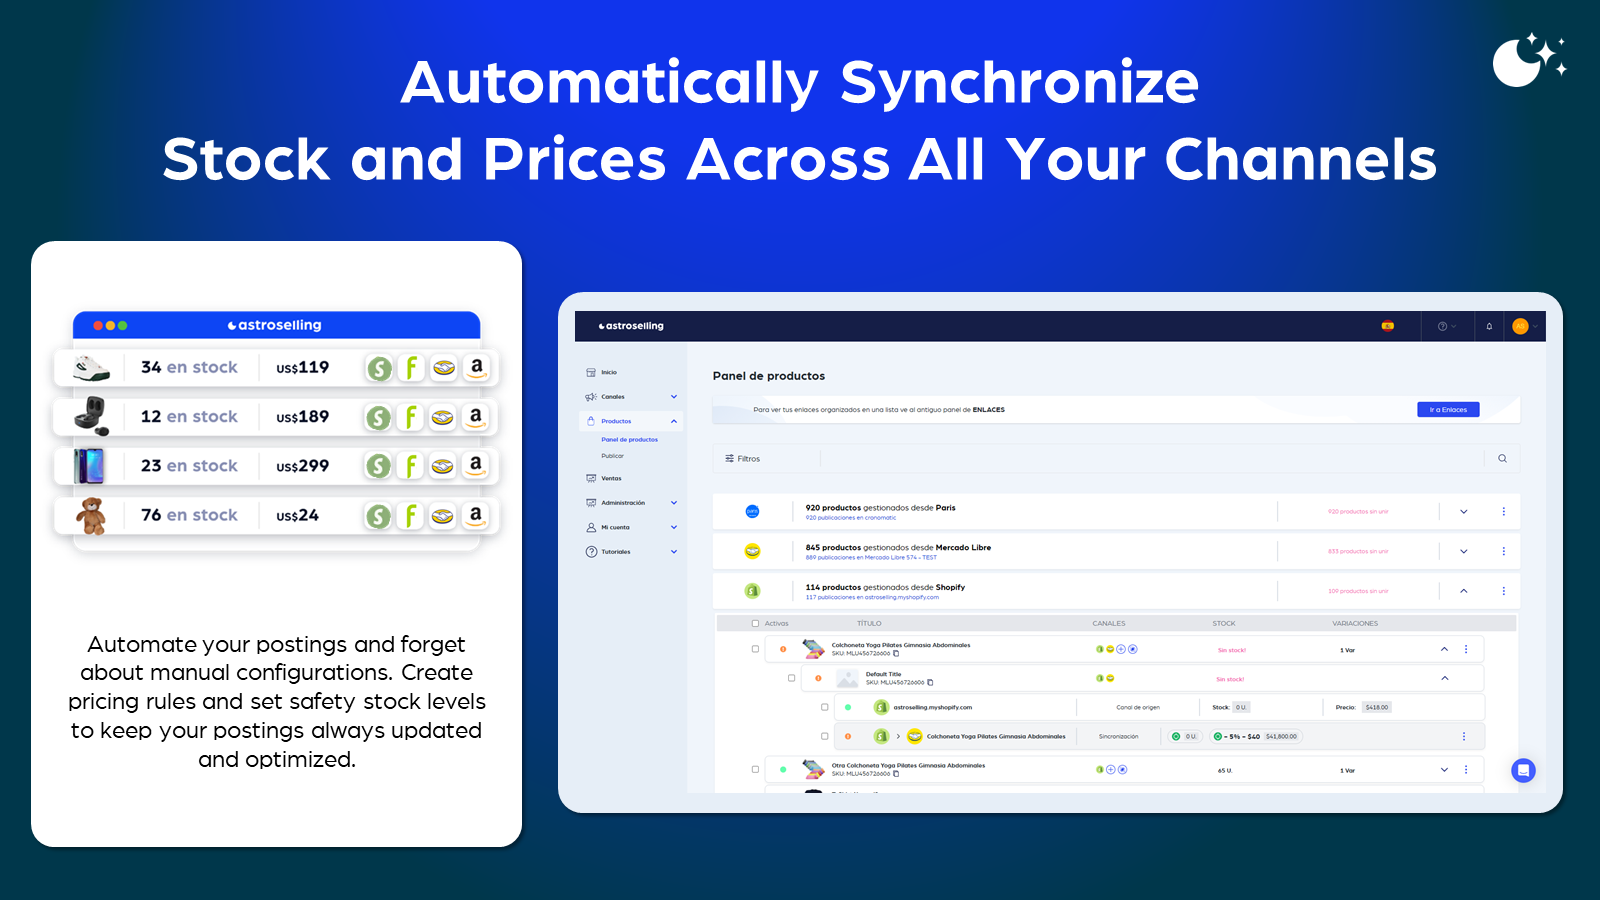 Synchronize Stock and Prices Across All Your Channels